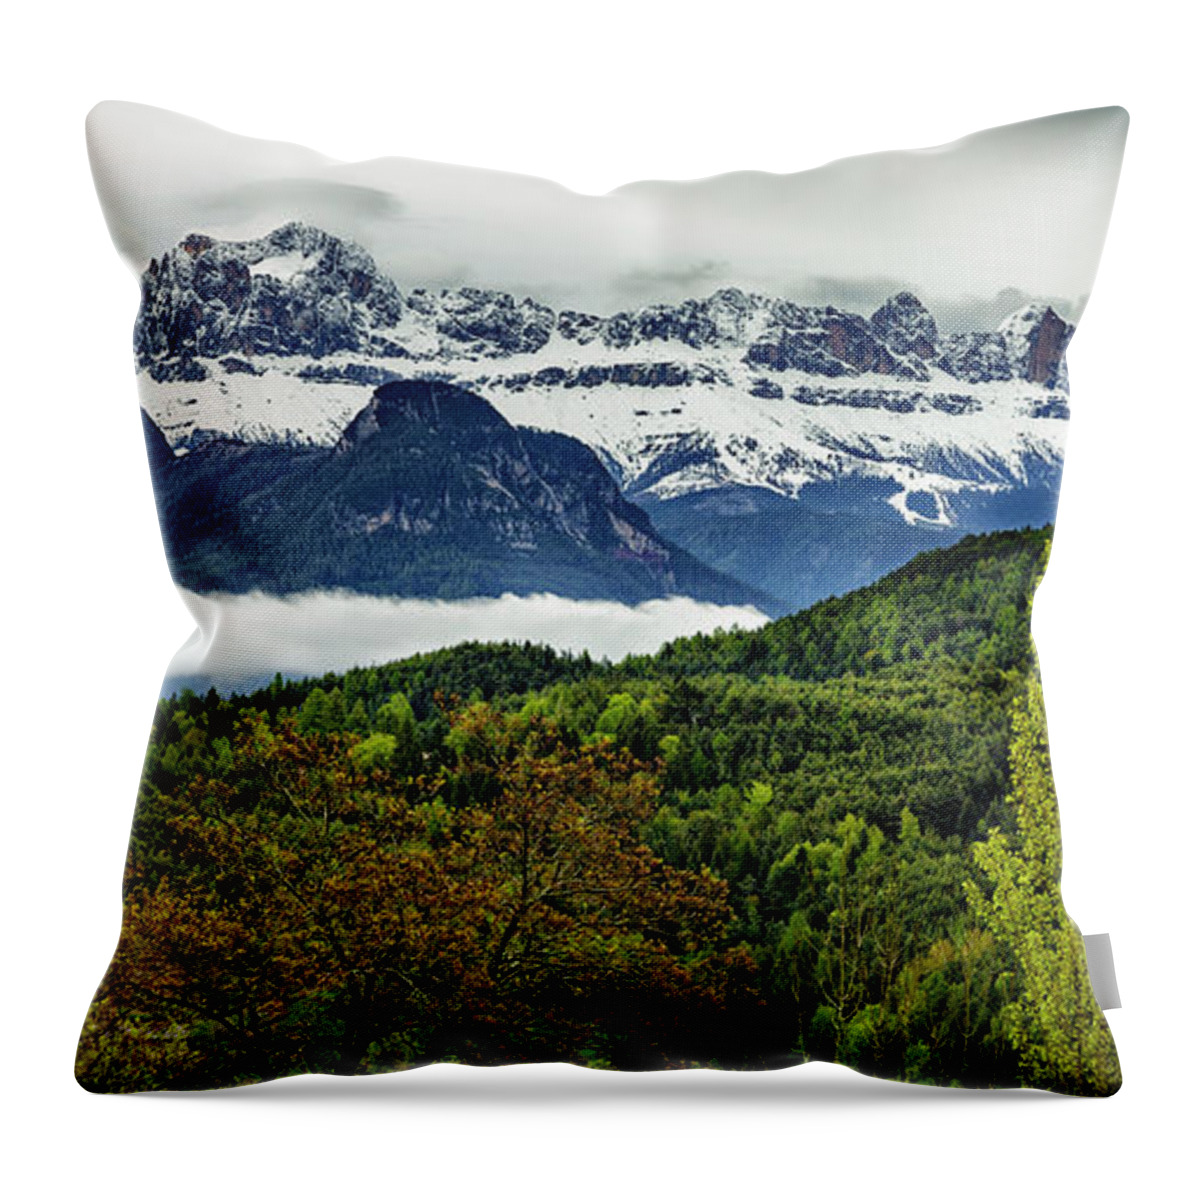 Gary-johnson Throw Pillow featuring the photograph The Dolomites by Gary Johnson